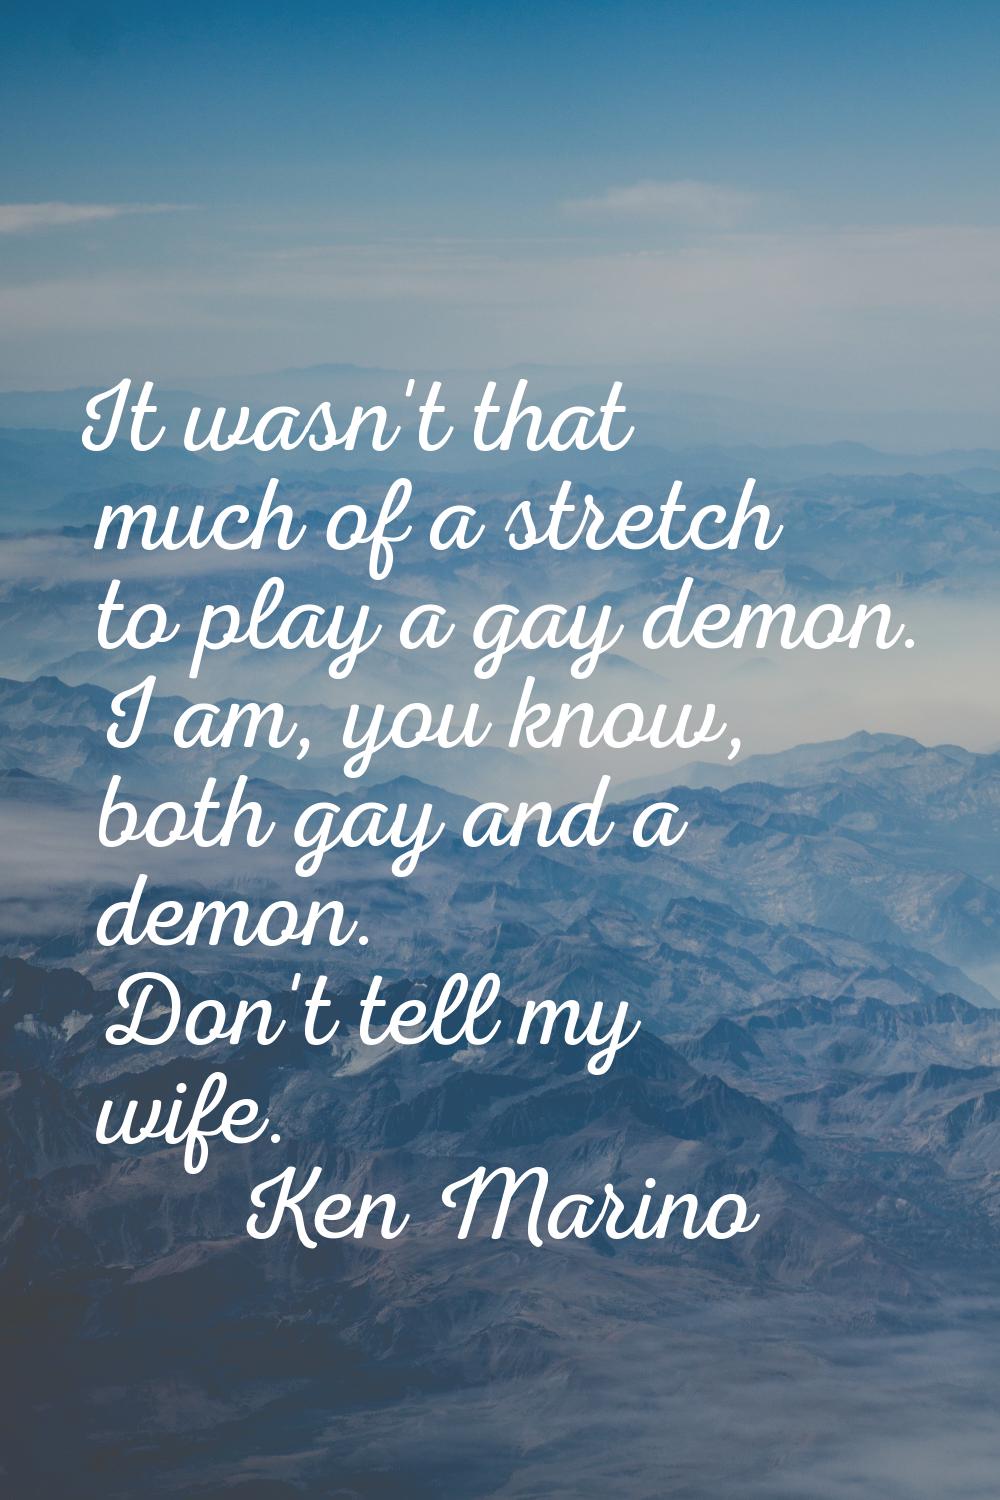 It wasn't that much of a stretch to play a gay demon. I am, you know, both gay and a demon. Don't t